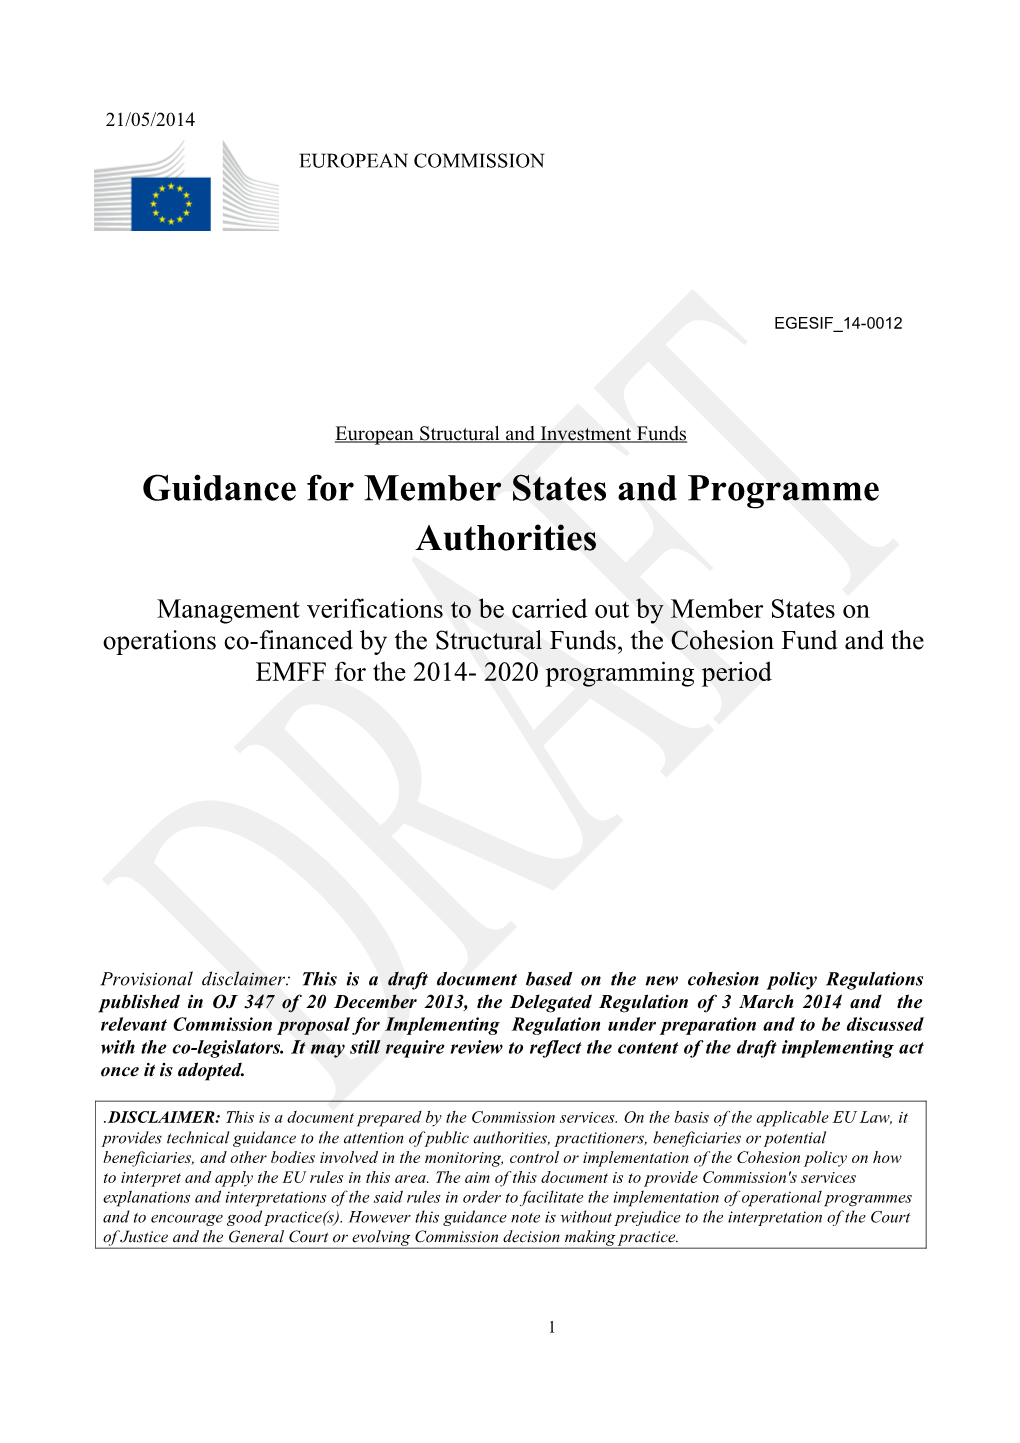 Guidance for Member States and Programme Authorities